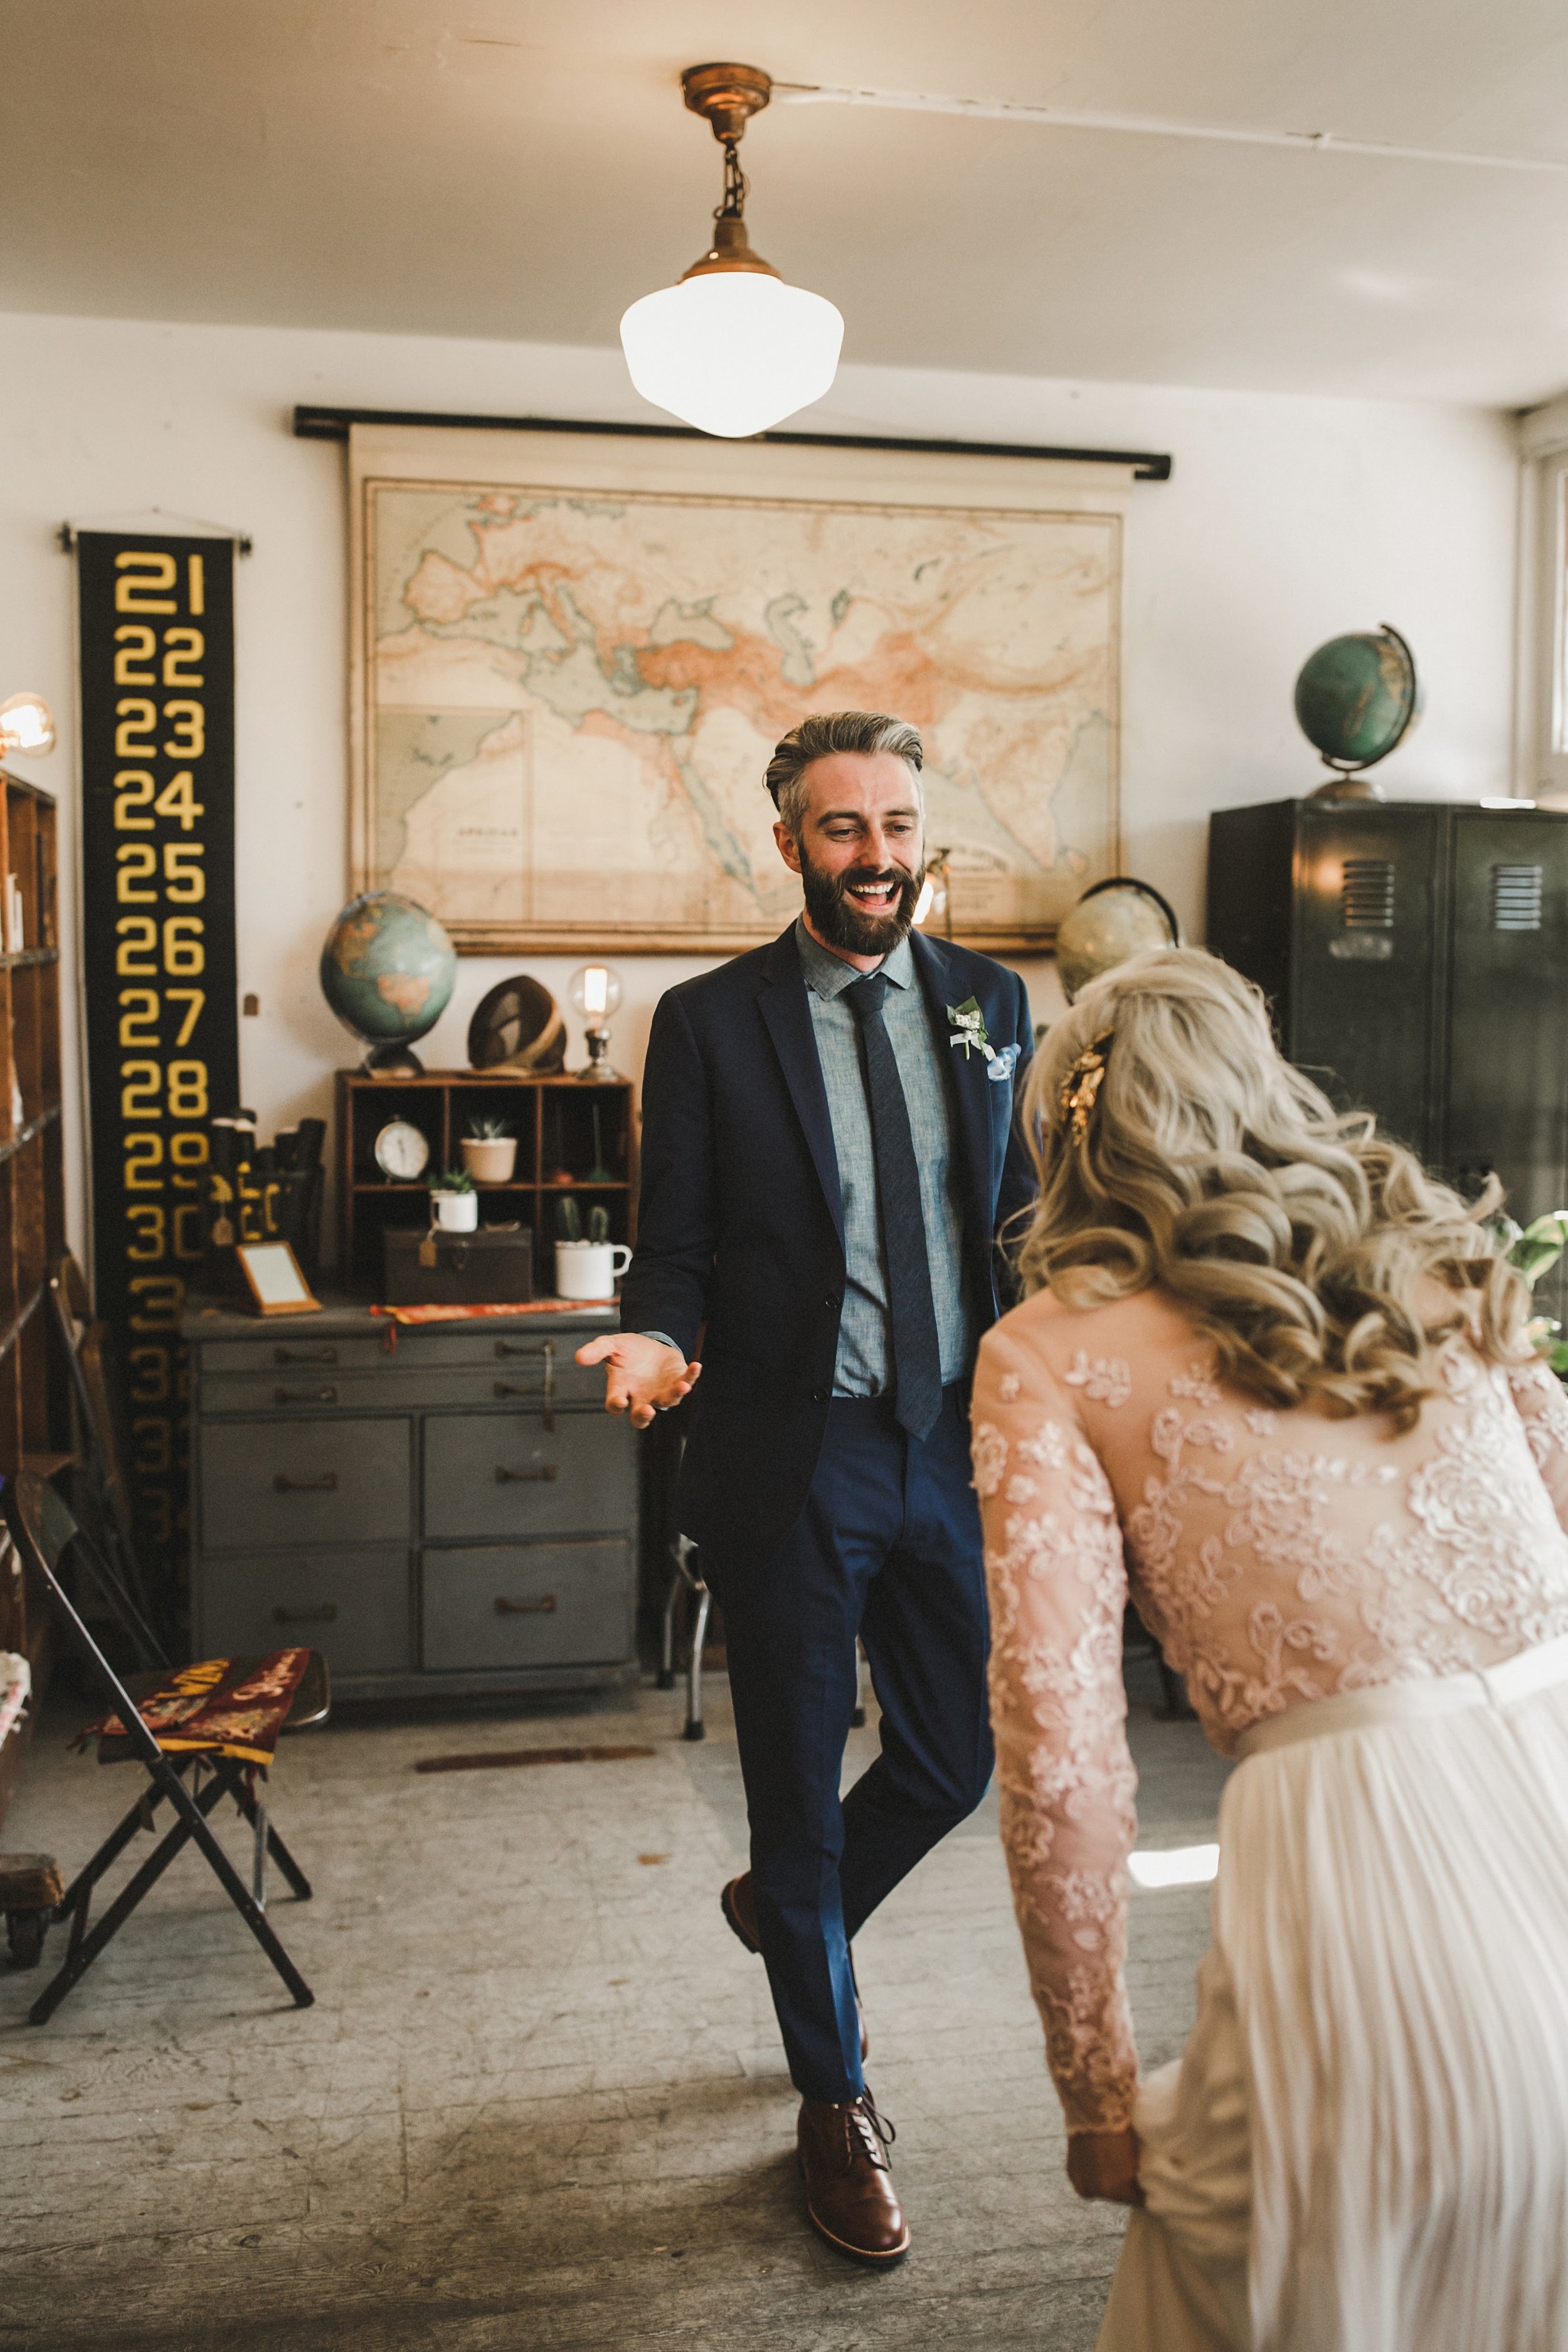 HOWE ABOUT FOREVA - Vancouver urban woodshop wedding by Shari + Mike photographers - first look